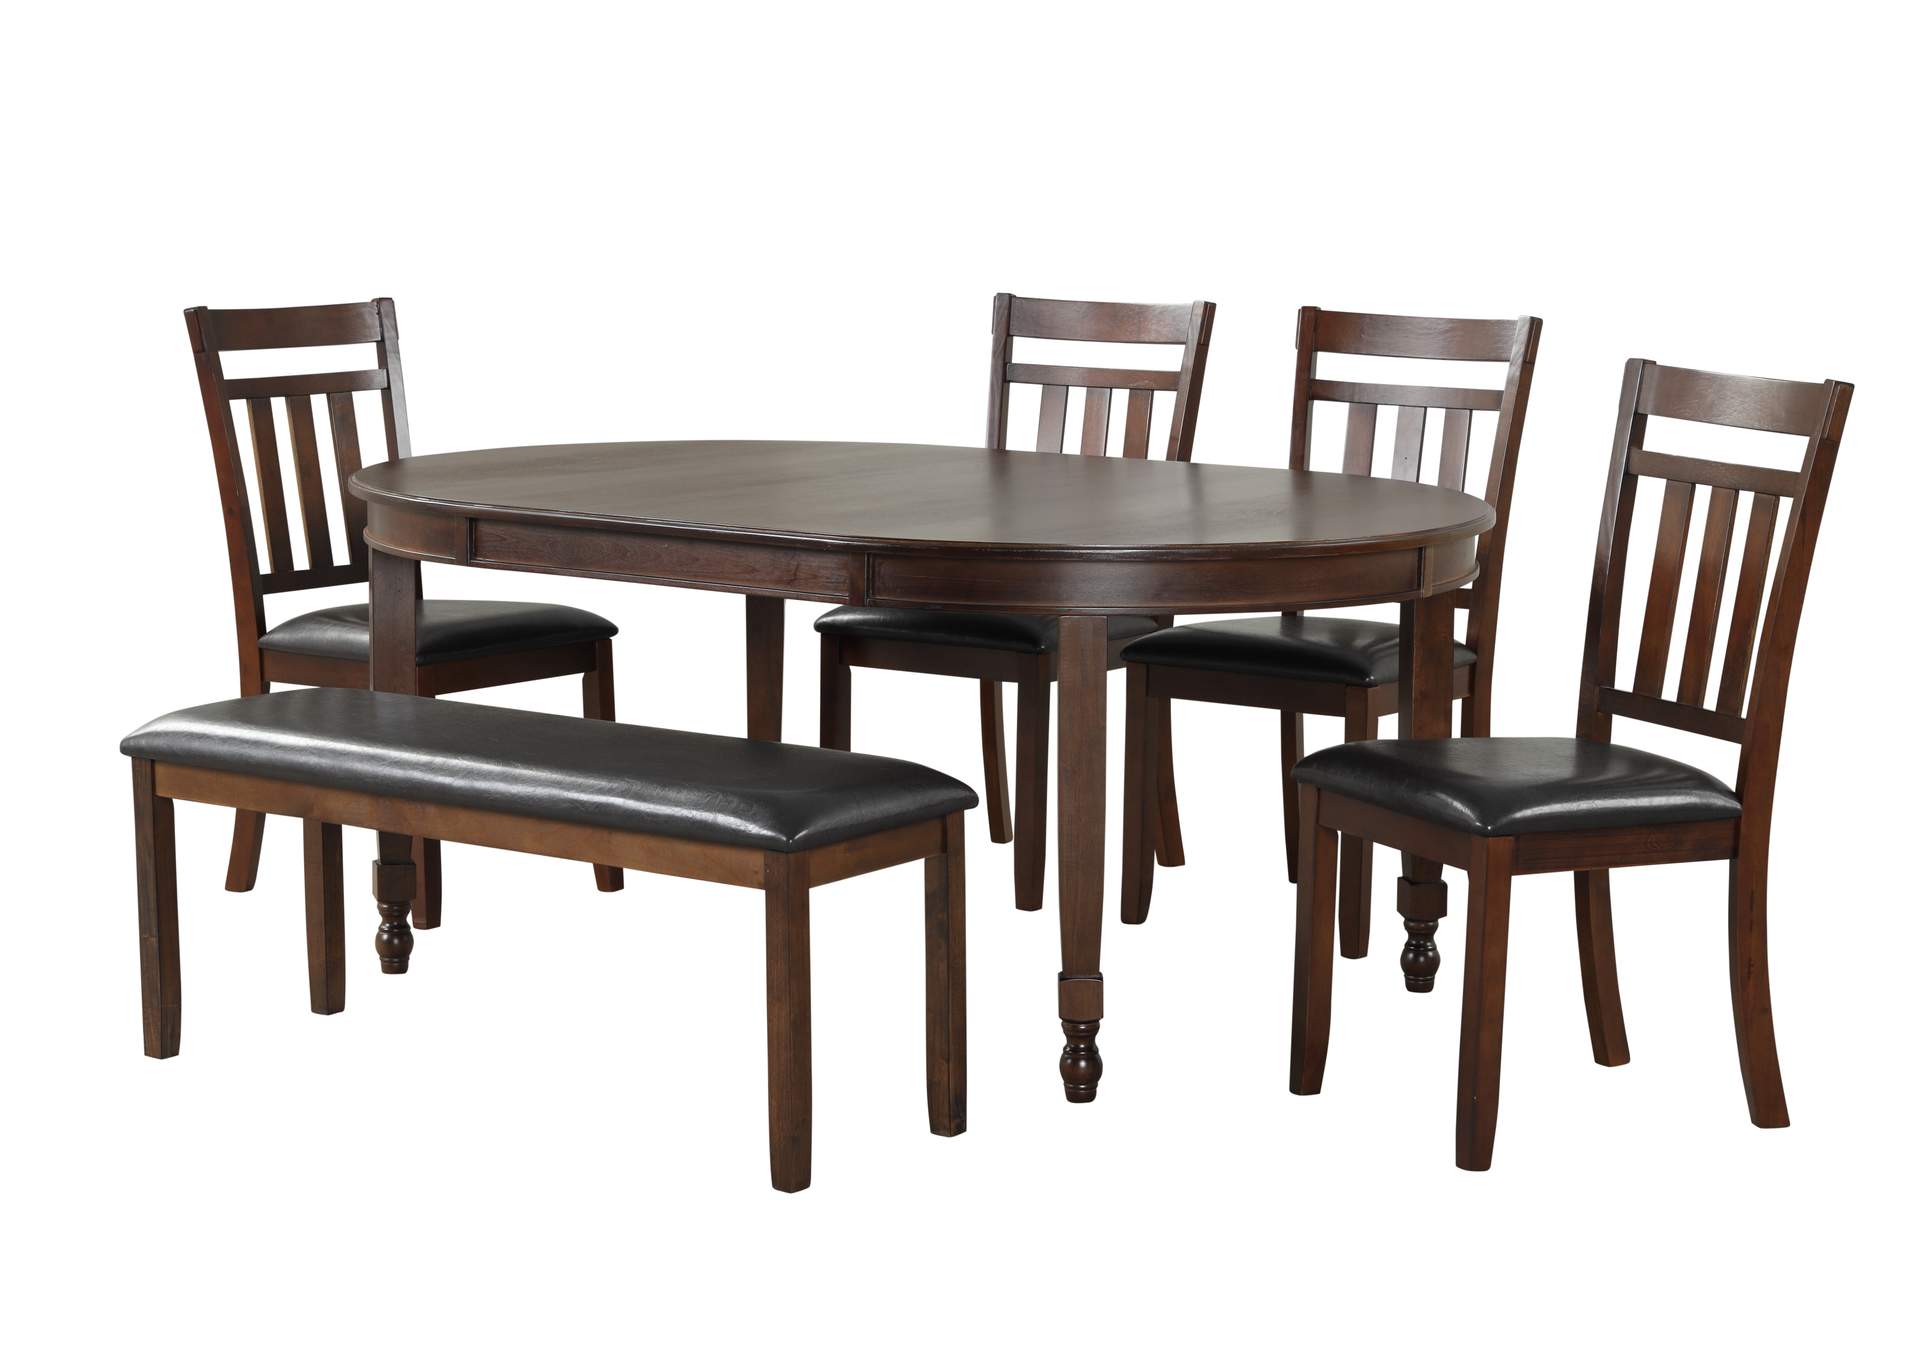 D4040D Walnut Dining Table,Global Trading